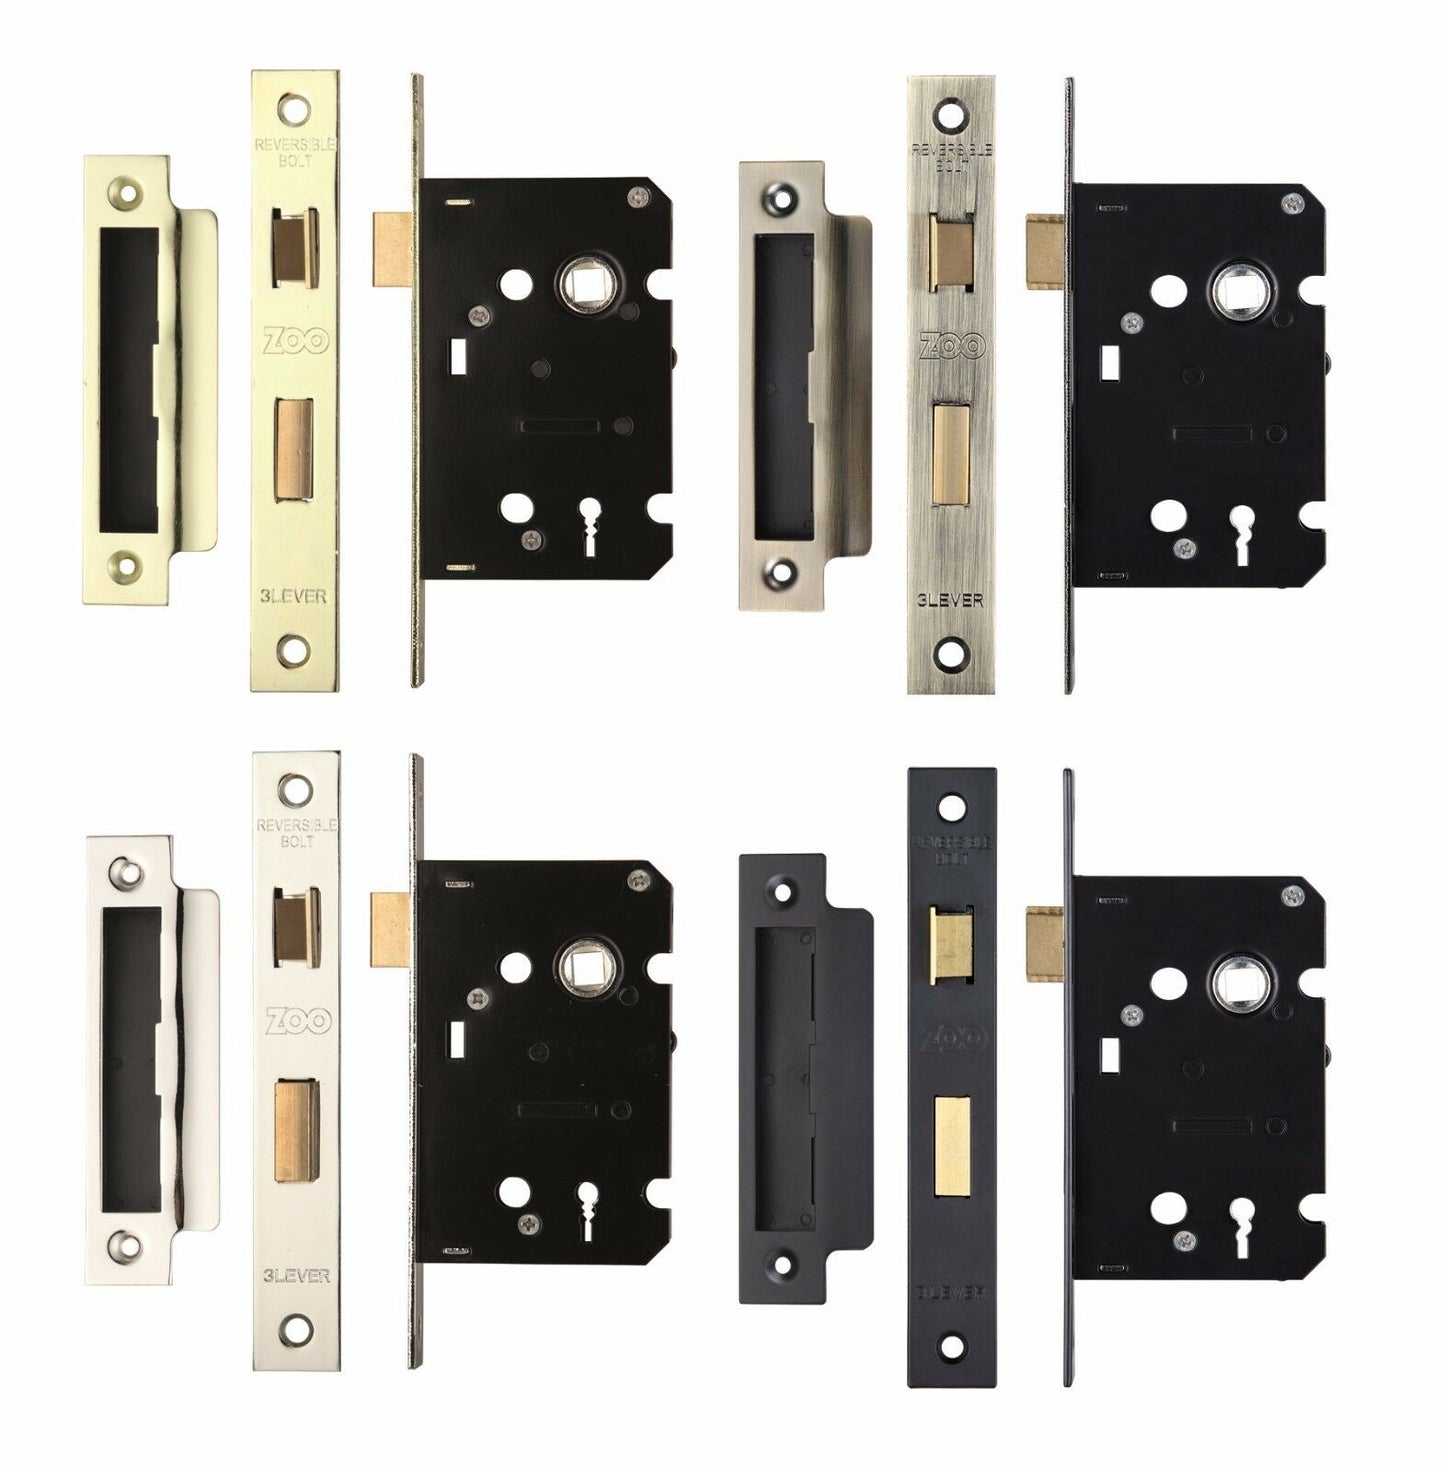 Zoo Hardware Contract 3 Lever Mortice Lock 76mm & 64mm - Various Finishes